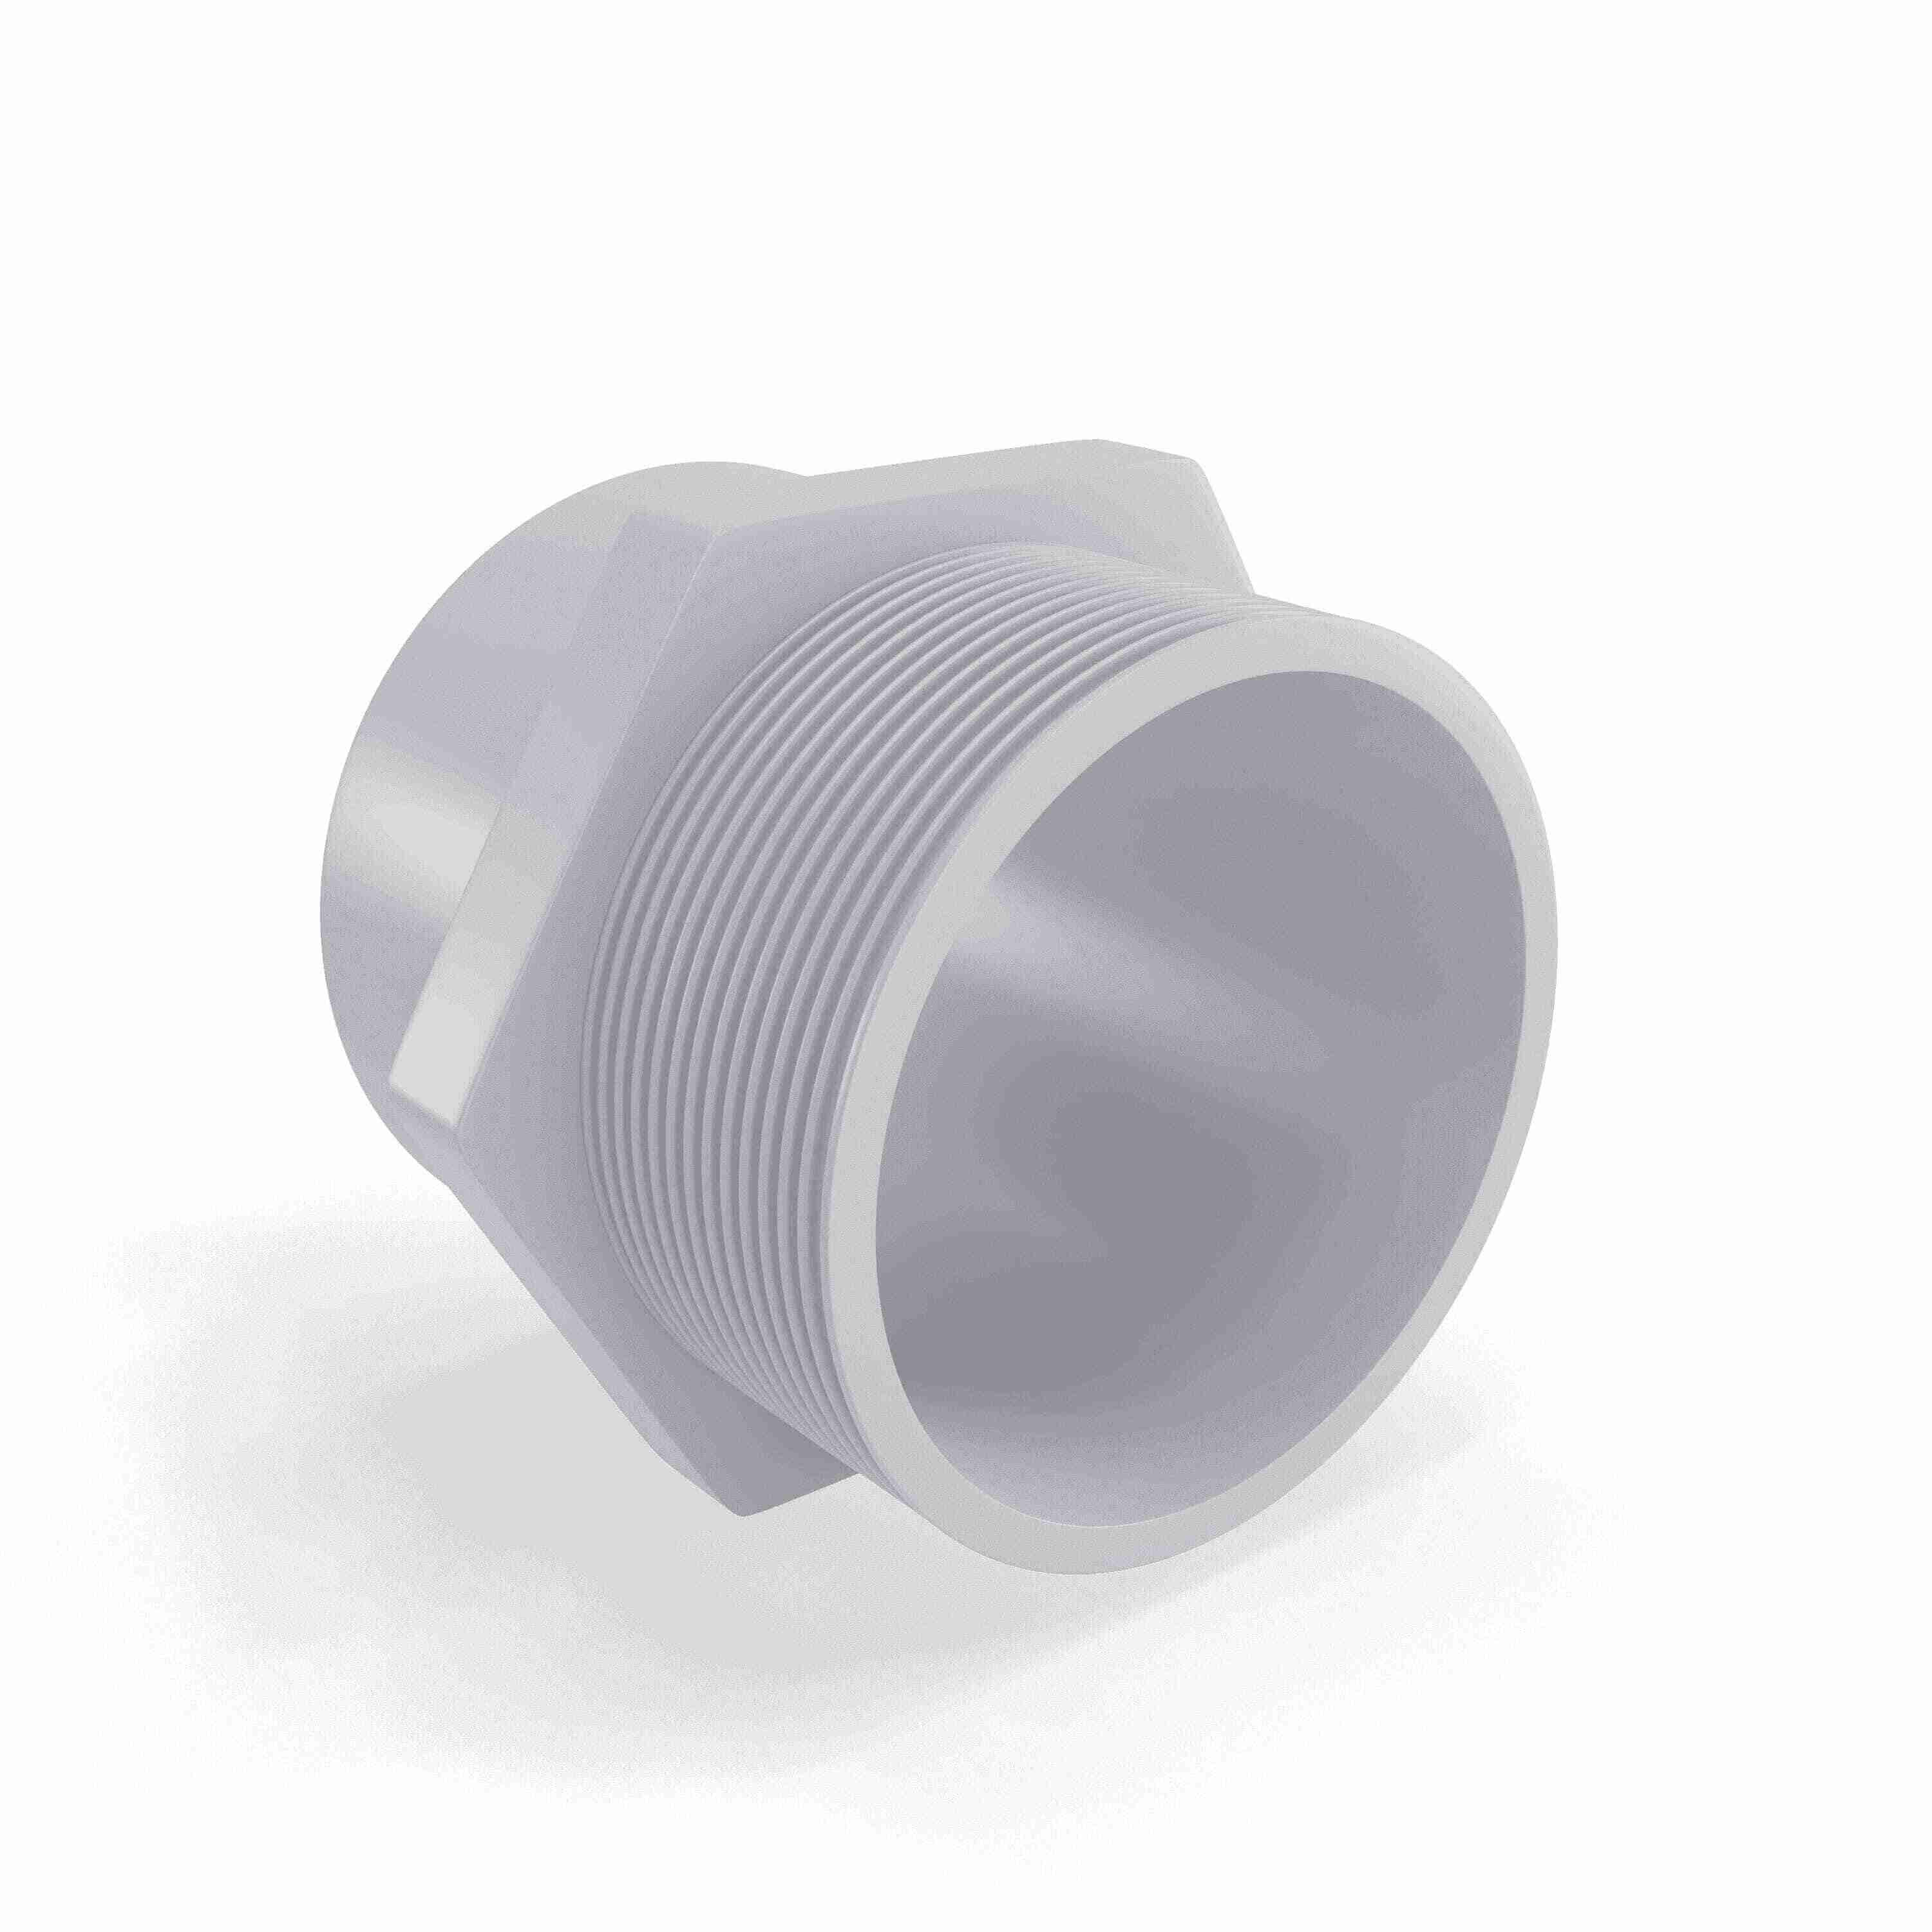 MALE THREADED ADAPTER